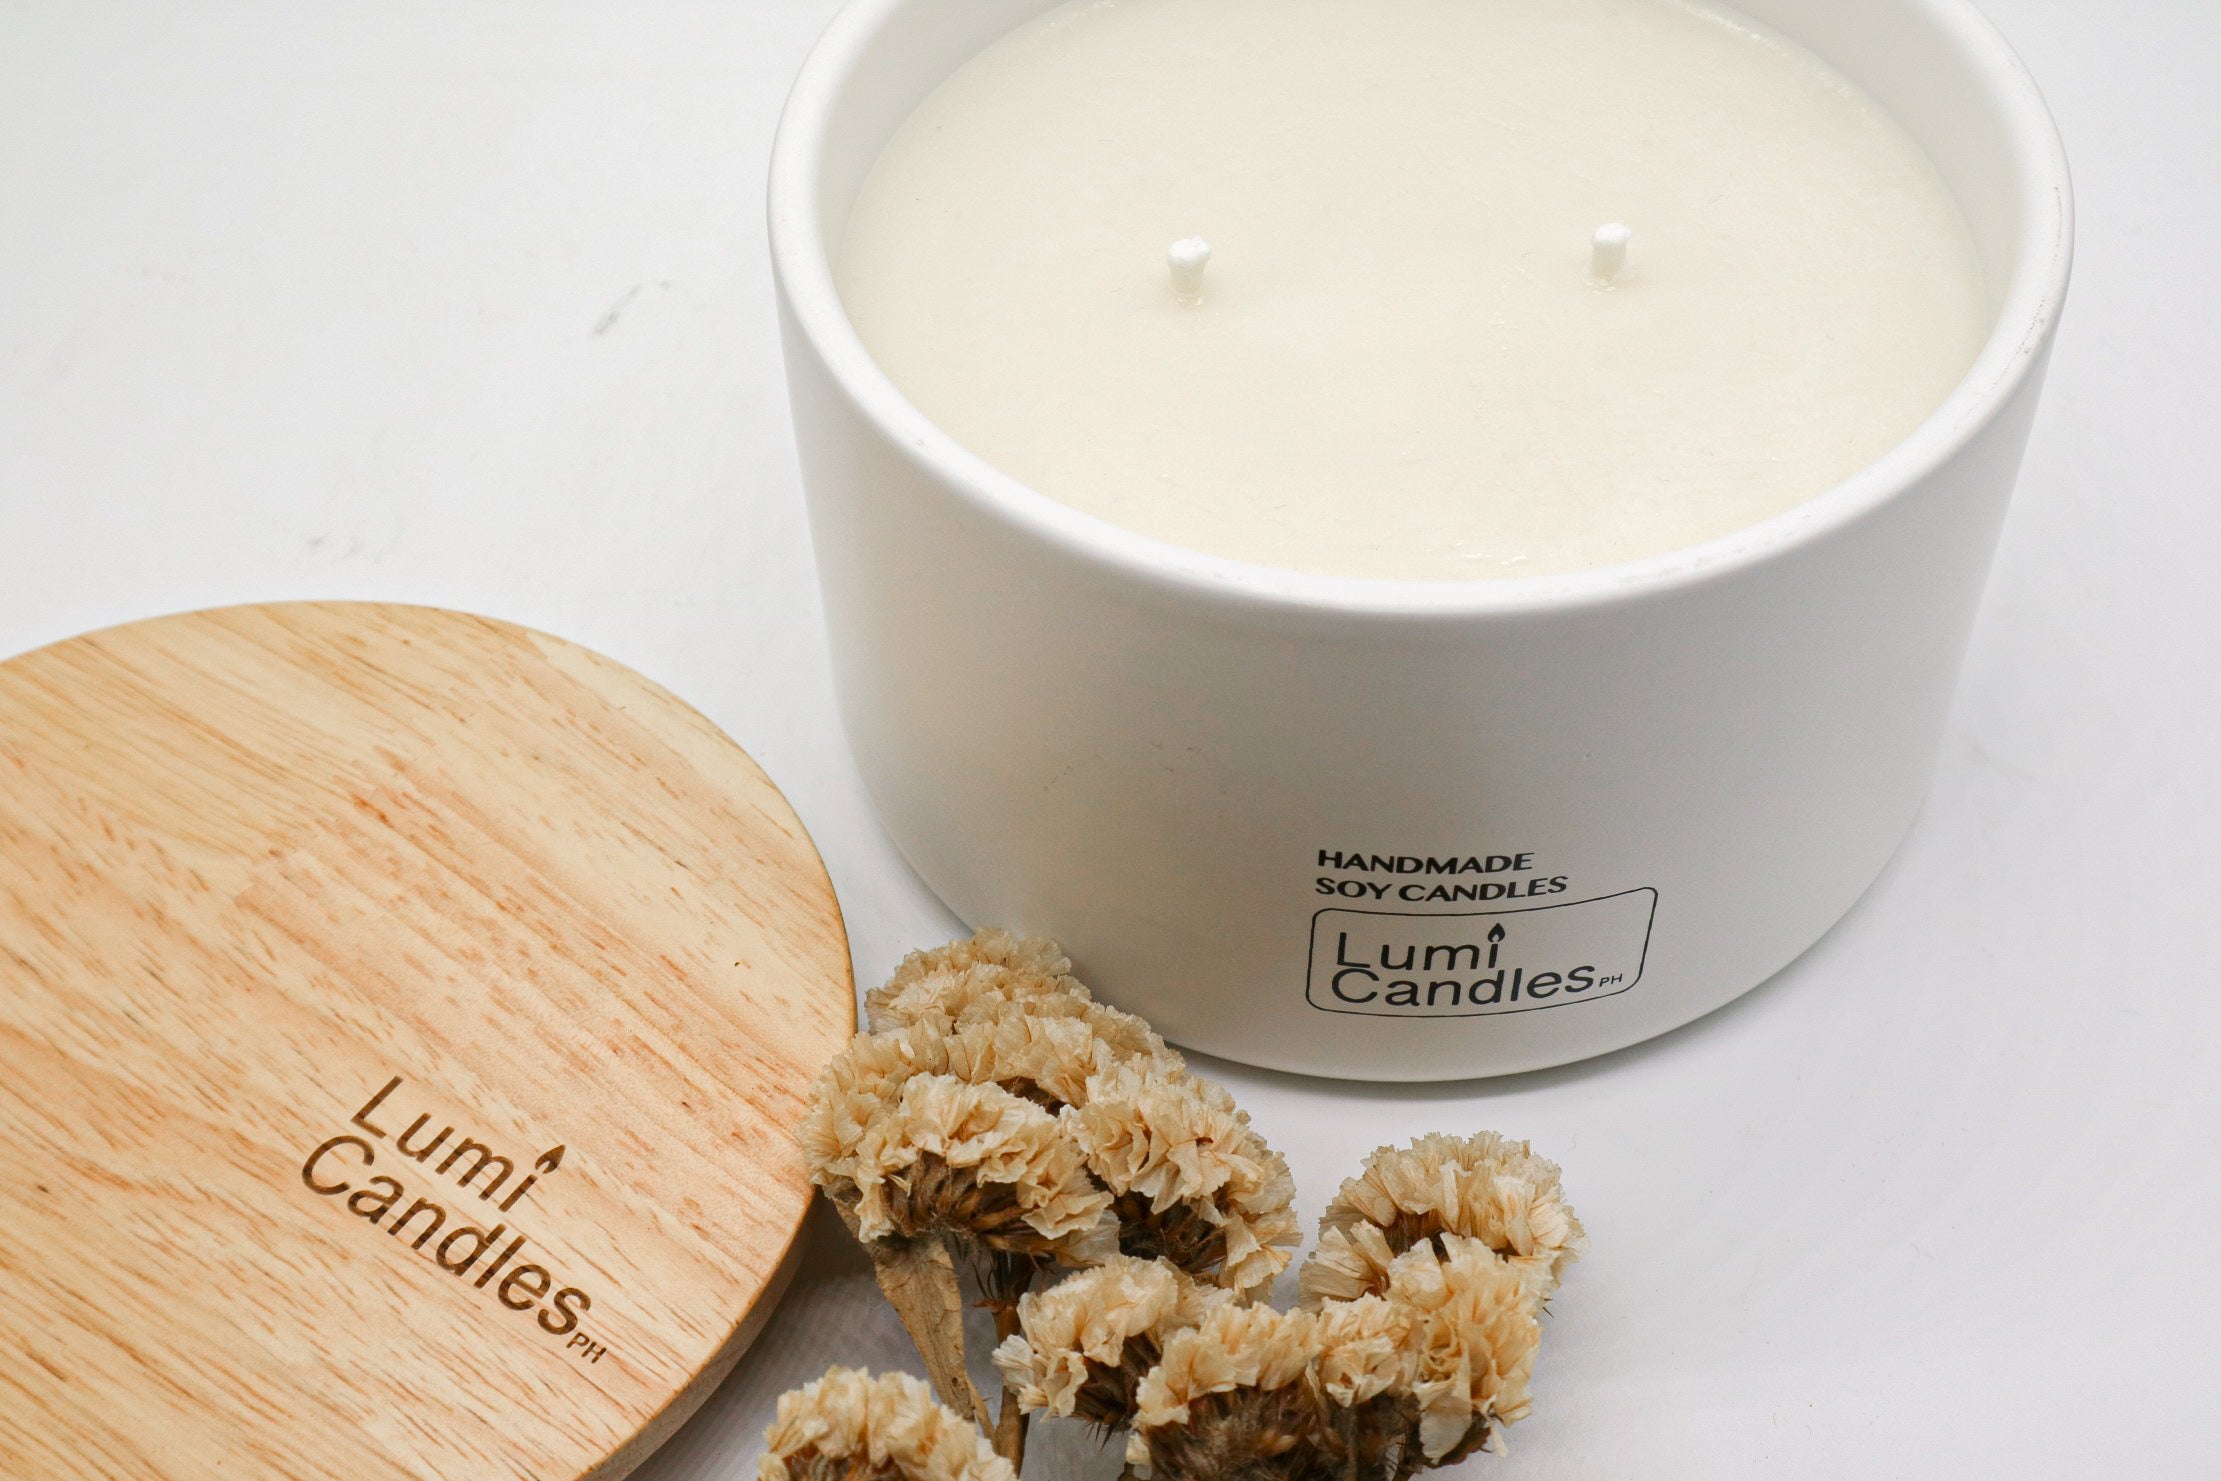 Vanilla Scented Soy Candle (800 ml)